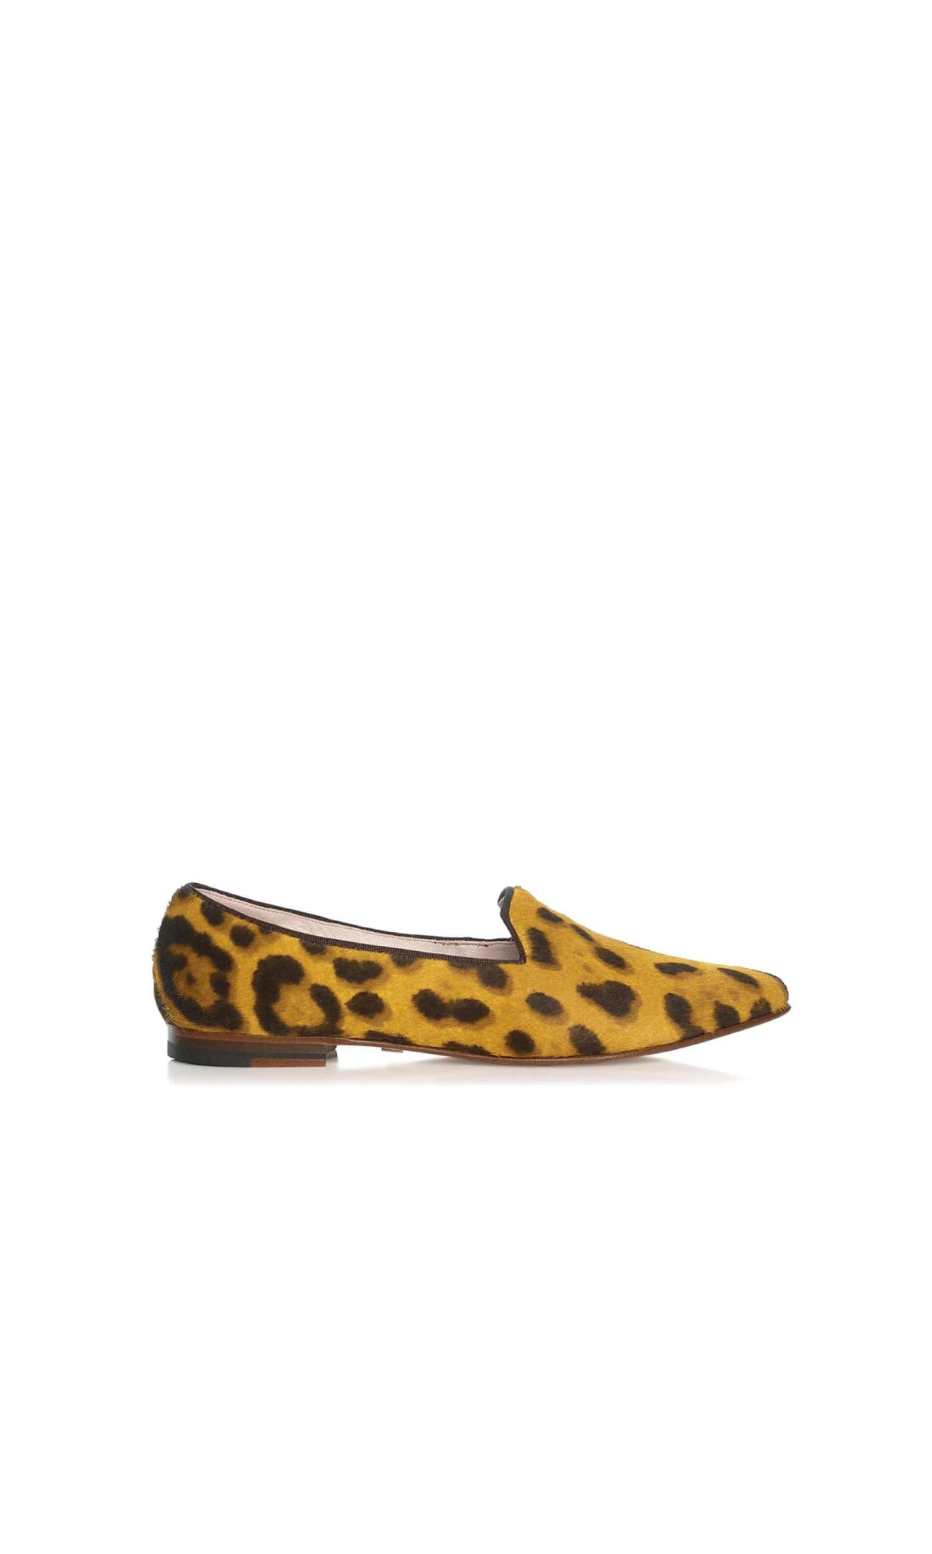 ossa loafers mariano leopard - side view